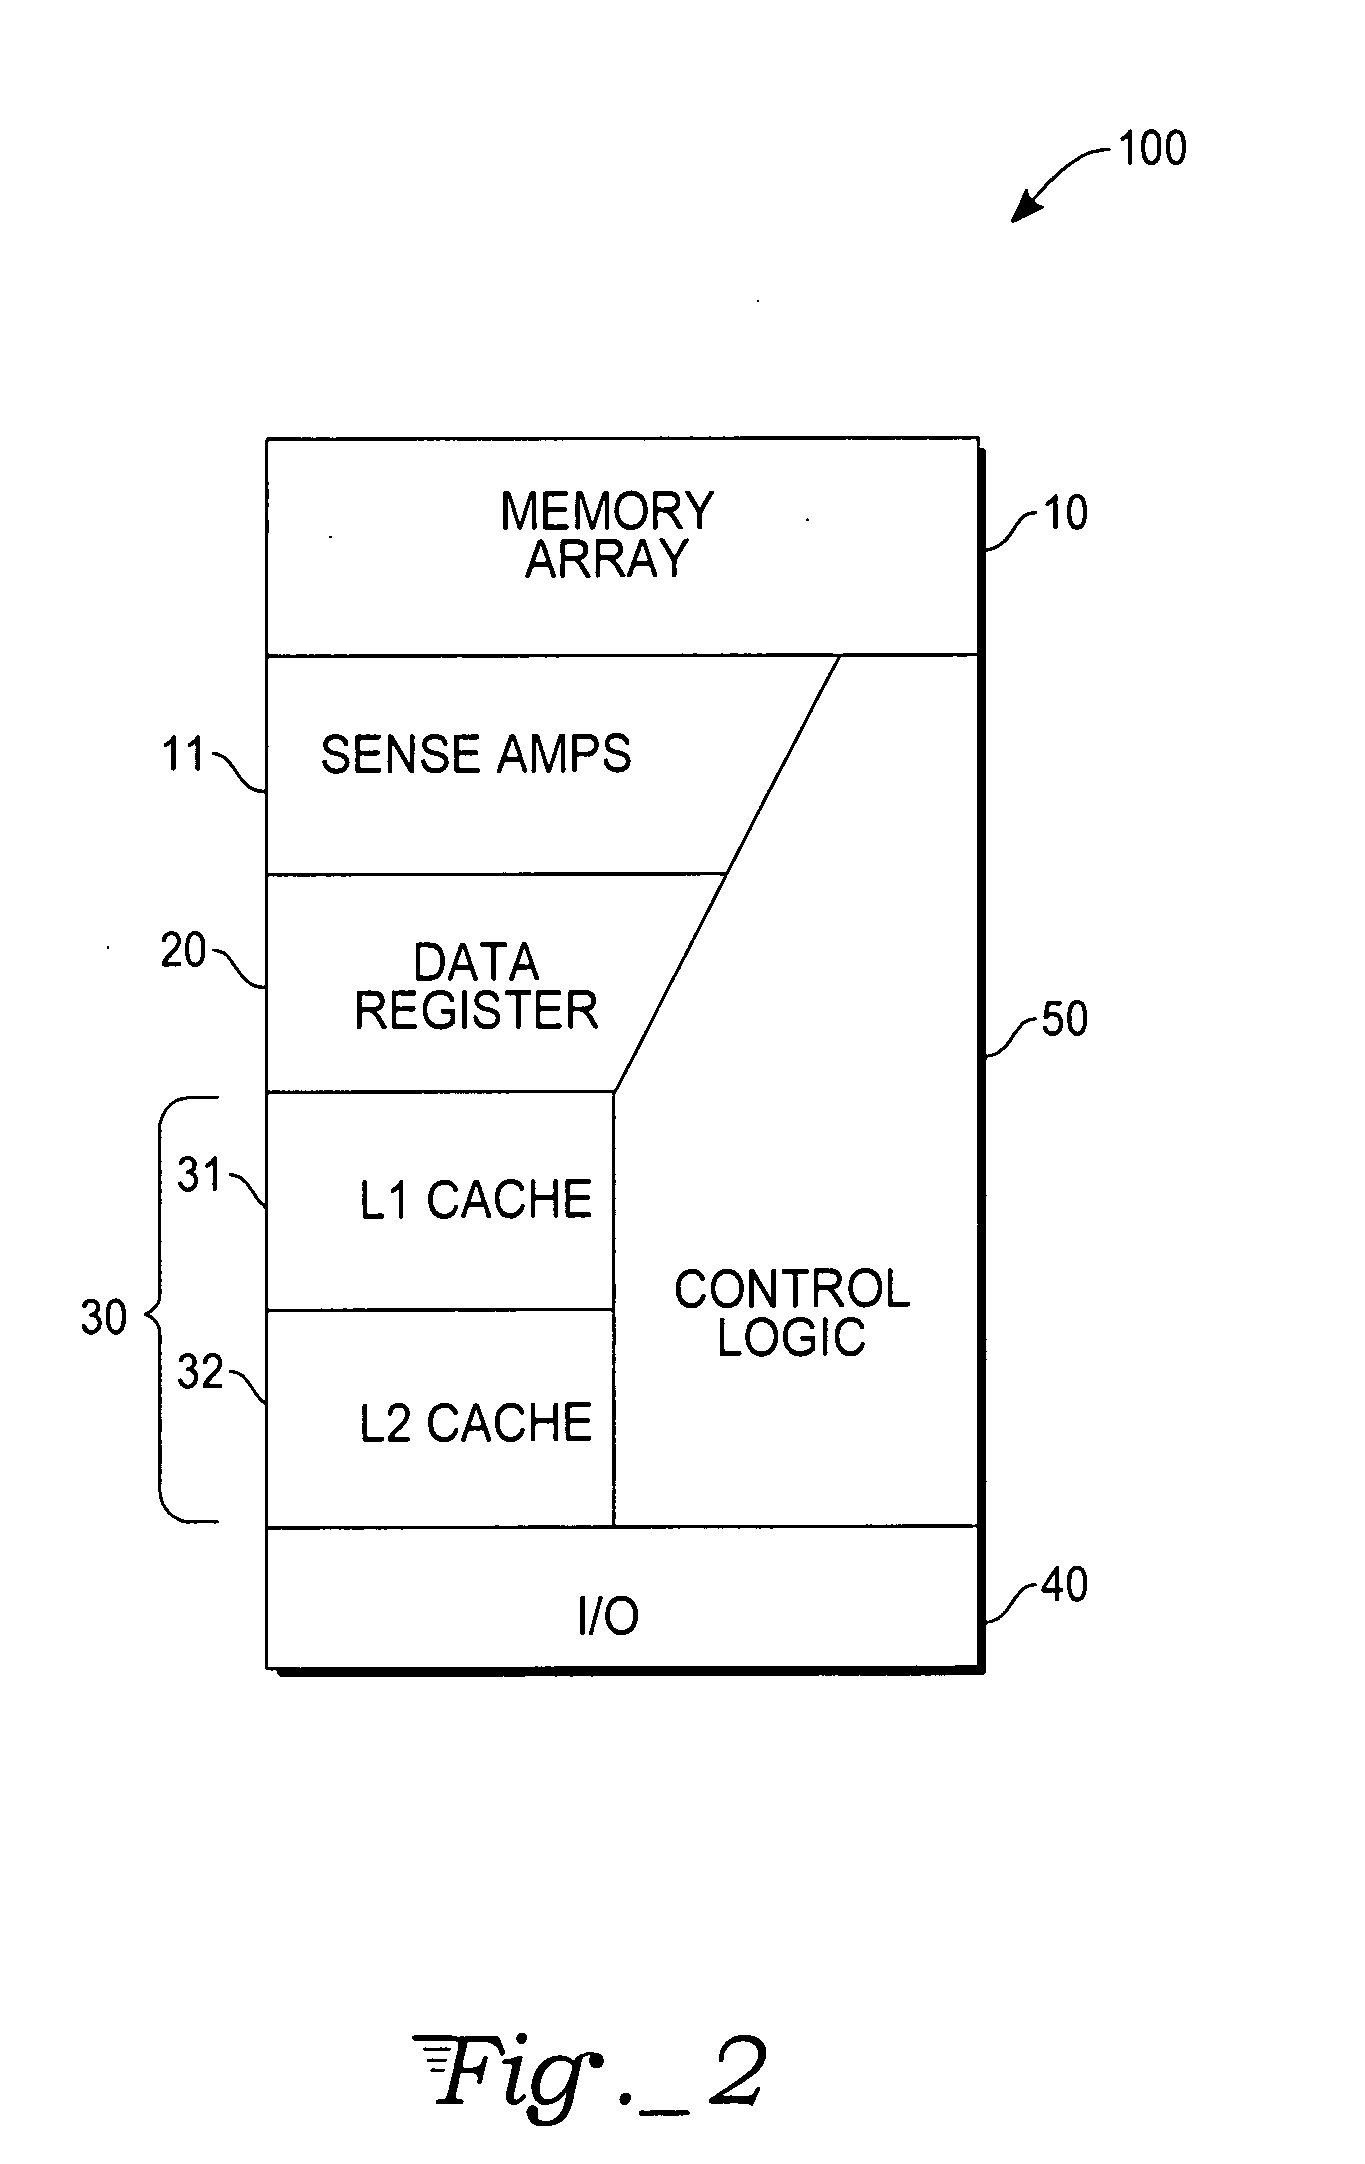 Simultaneous pipelined read with dual level cache for improved system performance using flash technology